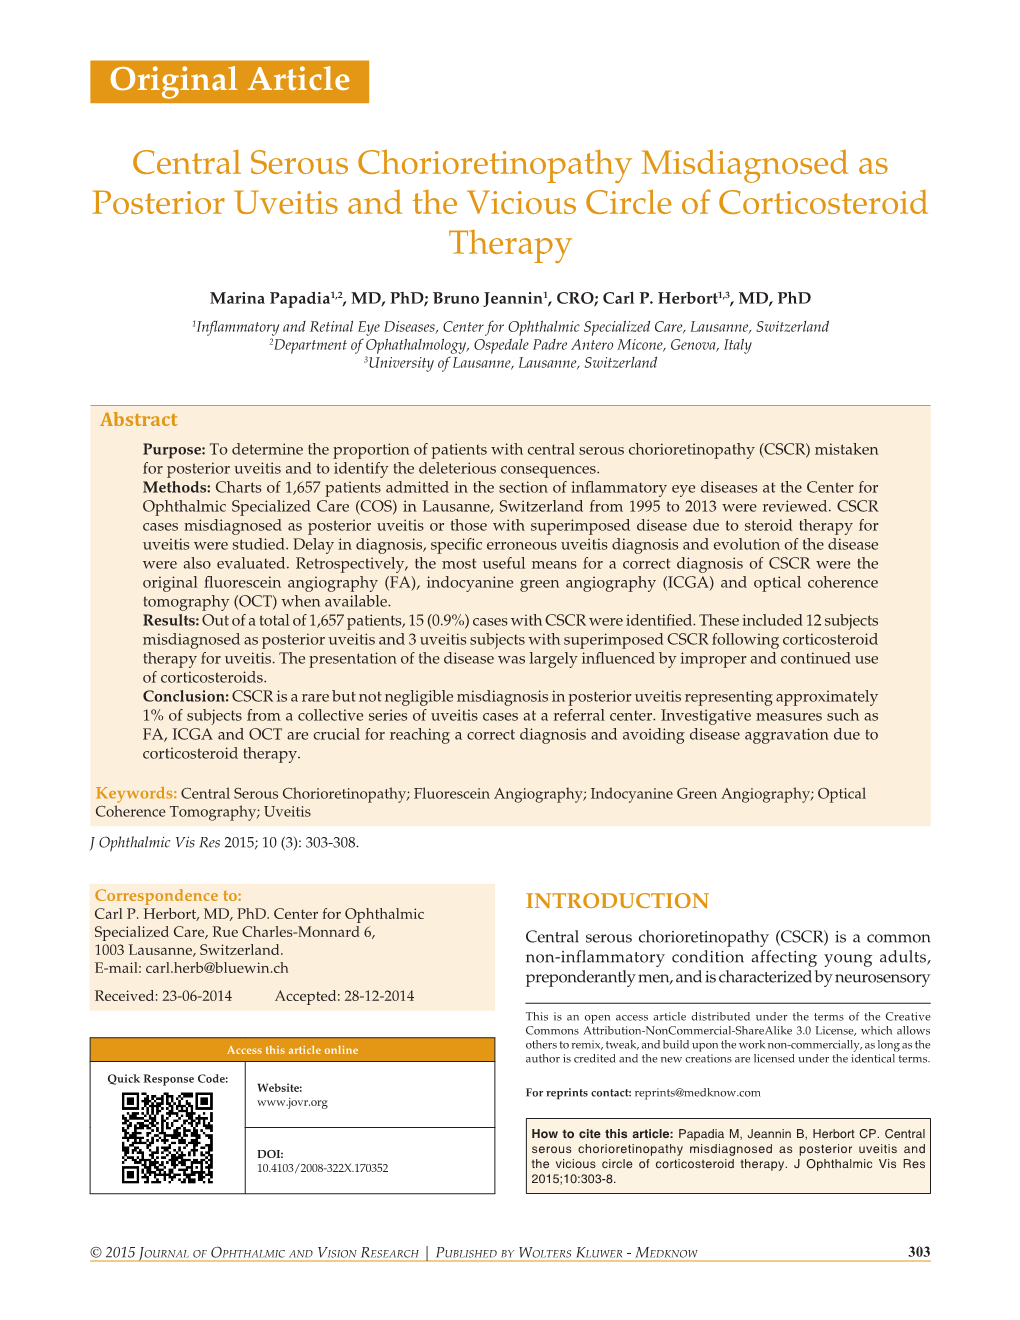 Central Serous Chorioretinopathy Misdiagnosed As Posterior Uveitis and the Vicious Circle of Corticosteroid Therapy